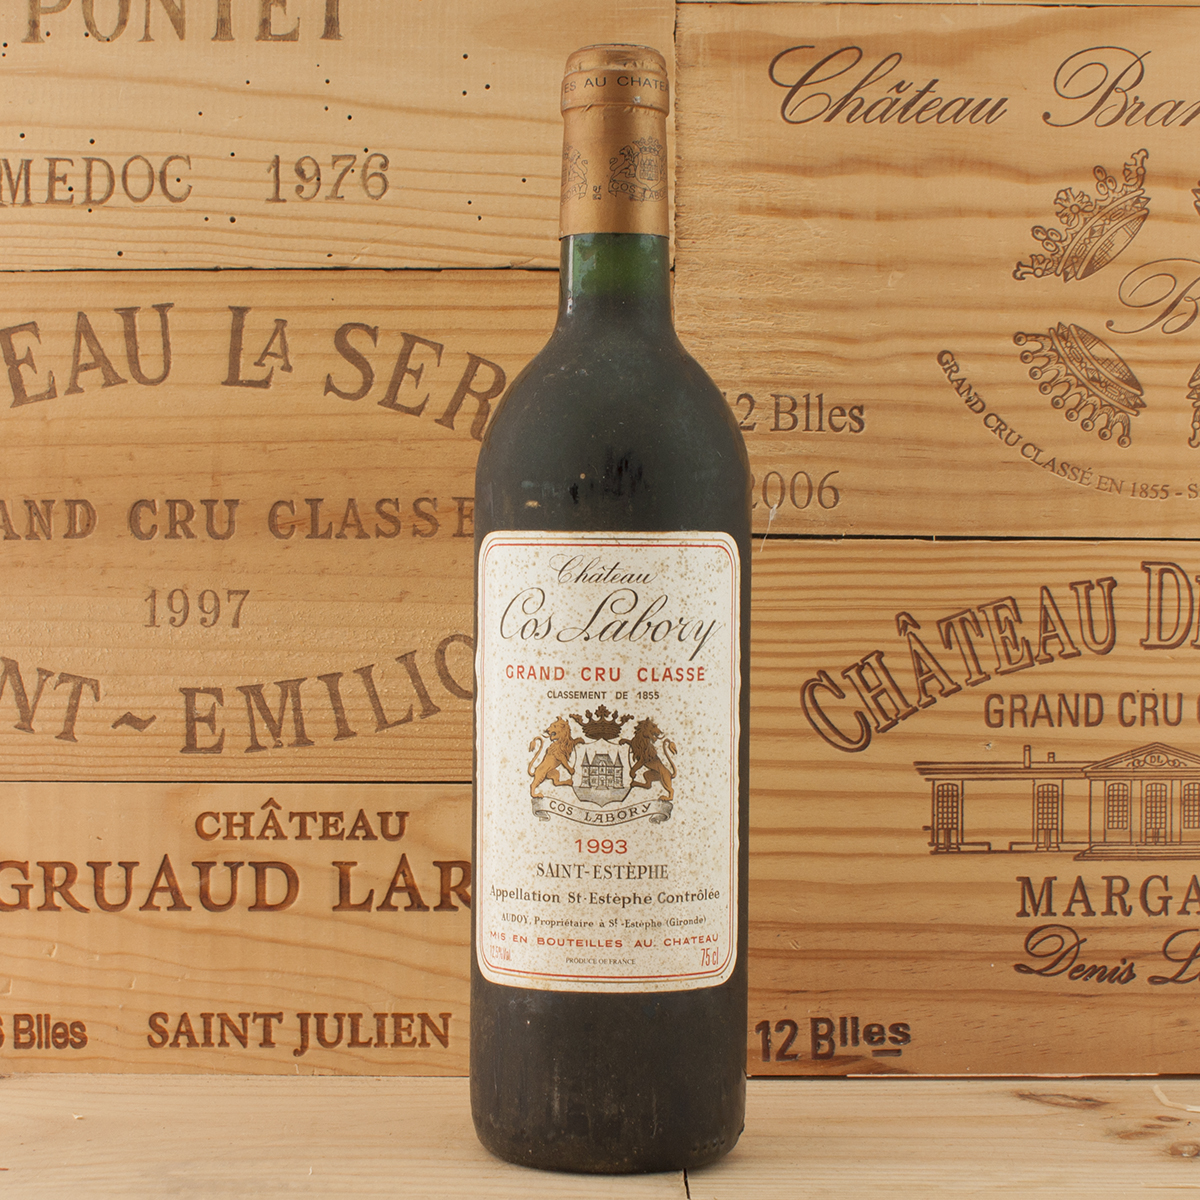 1993 Chateau Cos Labory